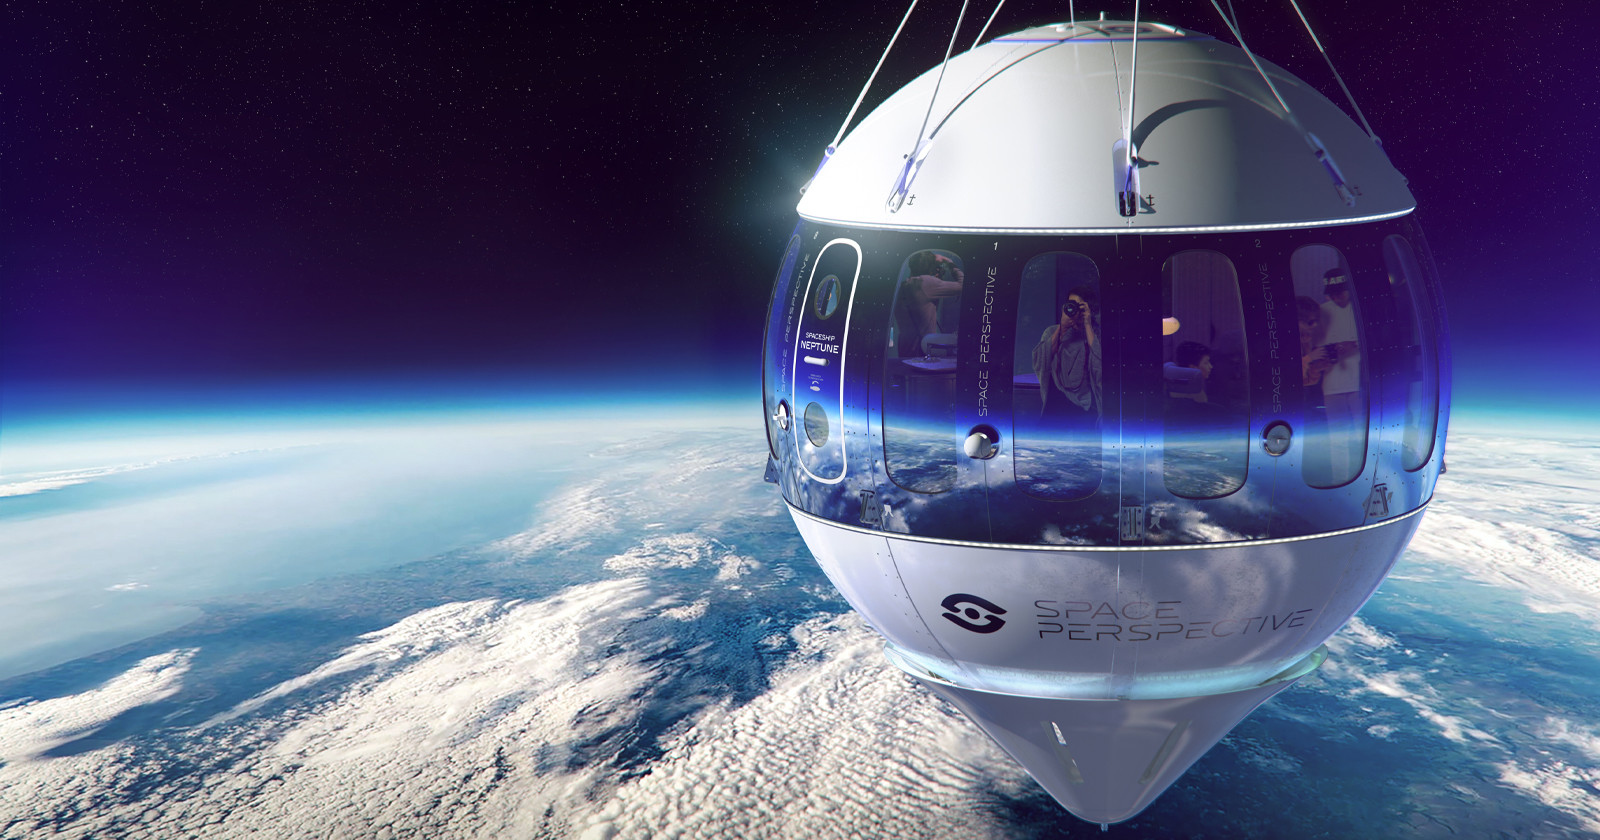 A Closer Look at the Capsule Making Space Photo Tourism a Reality